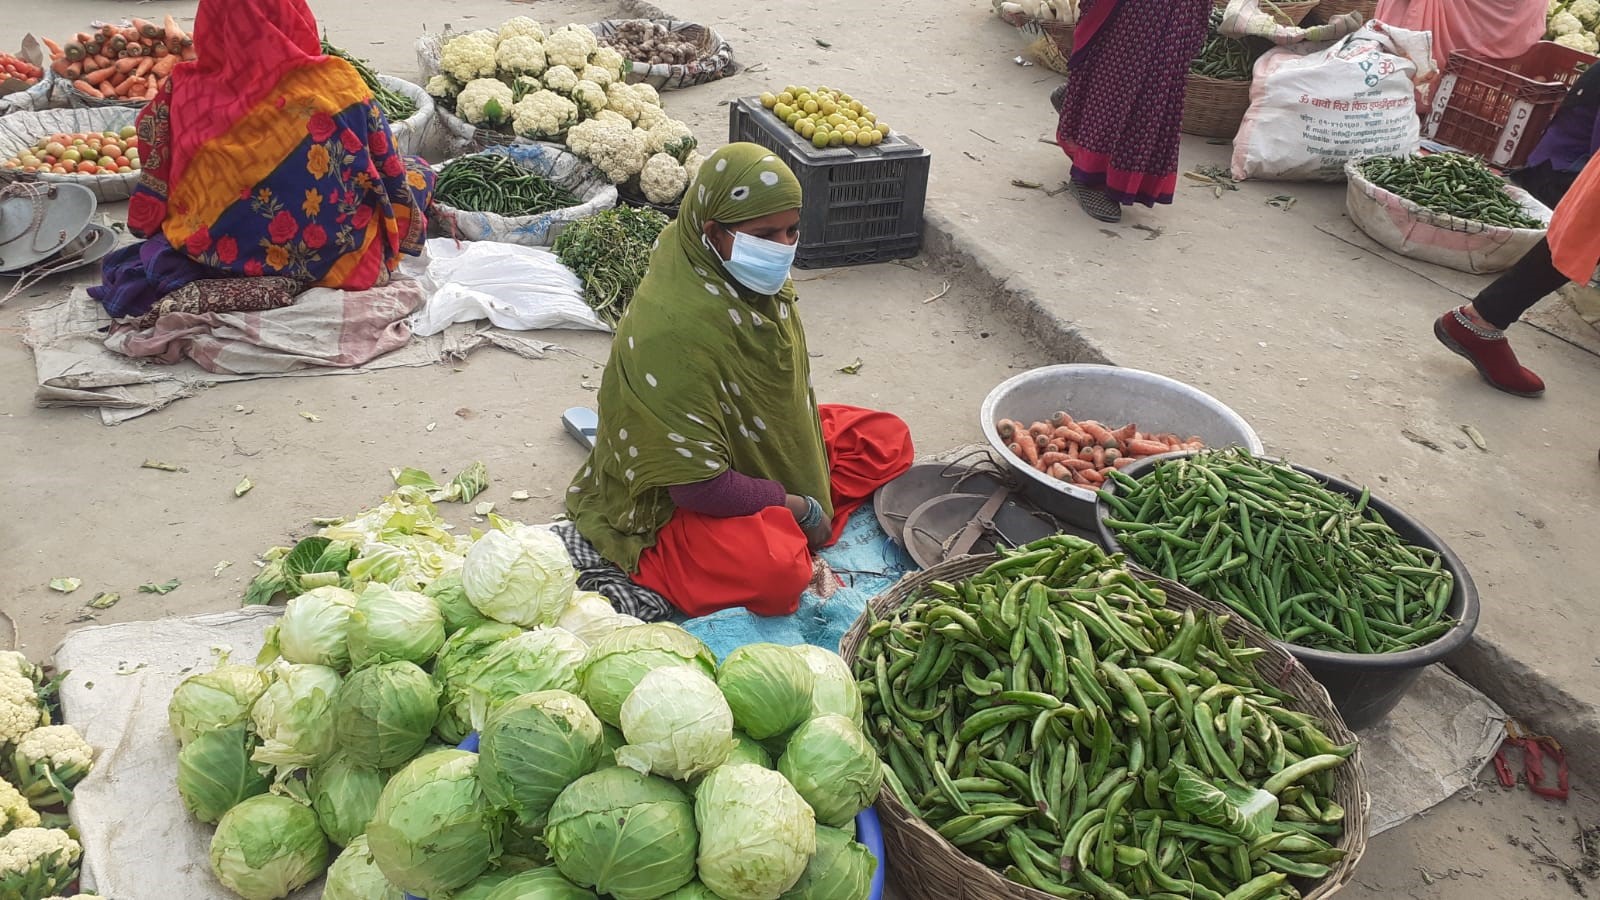 Gulnaz becoming self-reliant from vegetable selling business